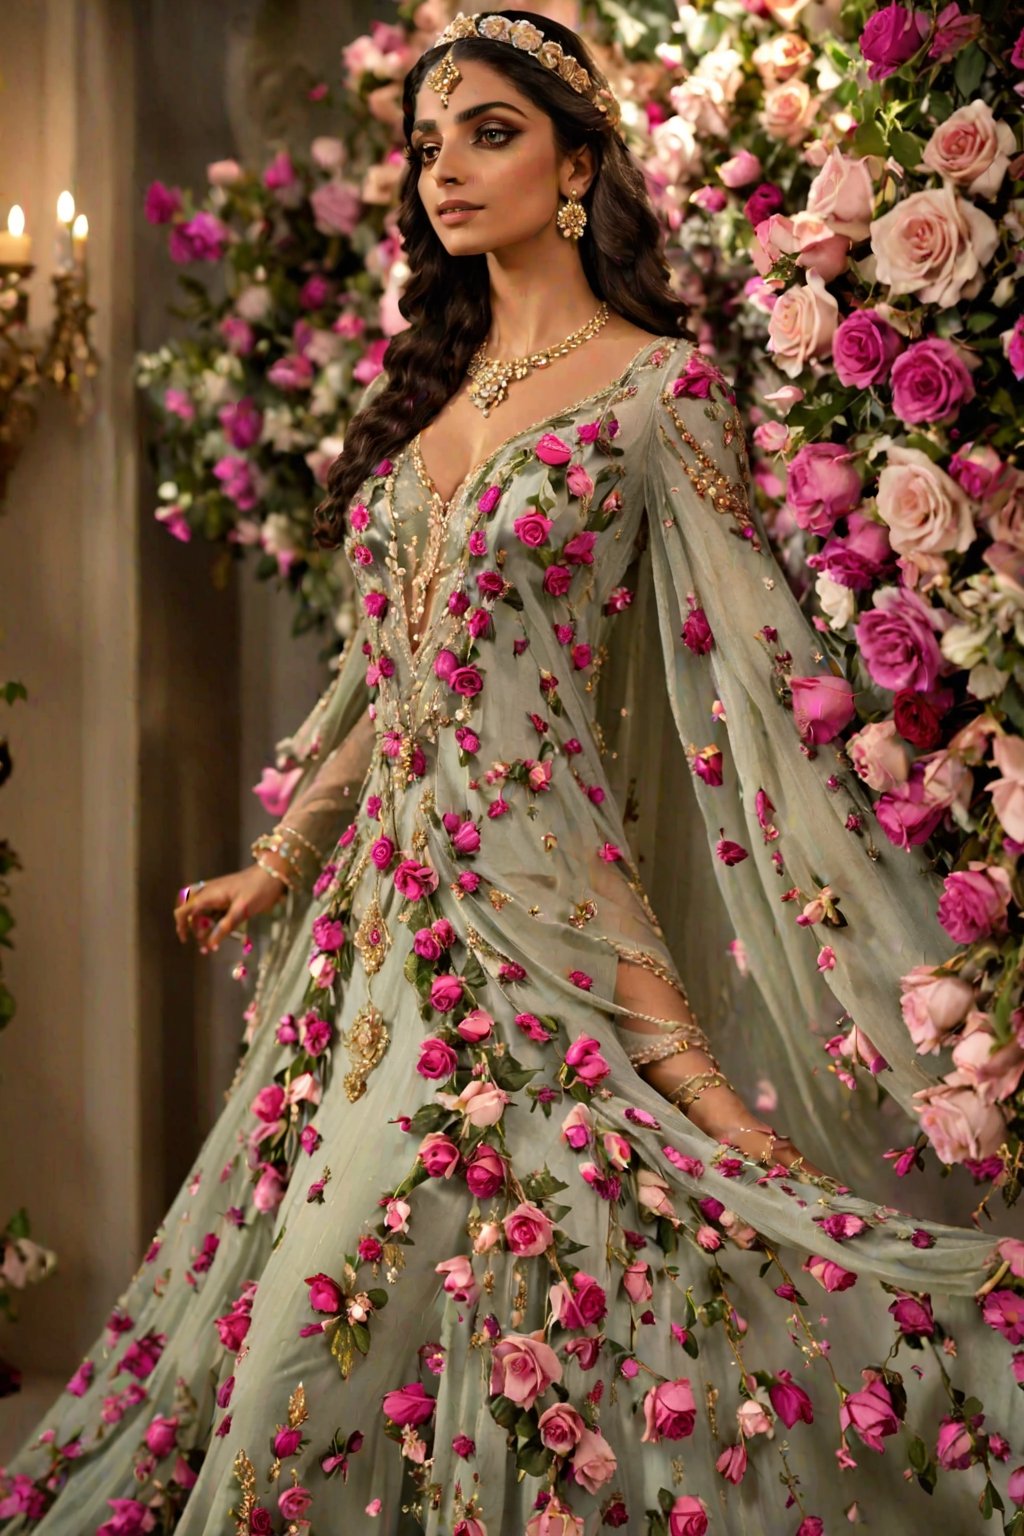 peerless beauty slavs Persian girl,adorned in a fantasy-themed caftan dress, resplendent with roses. This noblewoman exudes an aura of grace and elegance as she glides through the room, her dress trailing behind her like a cascade of delicate petals. The caftan, intricately embellished with intricate floral patterns and shimmering gemstones, enhances her ethereal allure. With every step, she exudes the timeless charm of a fairy-tale princess, ,Flower queen,Pakistani dress